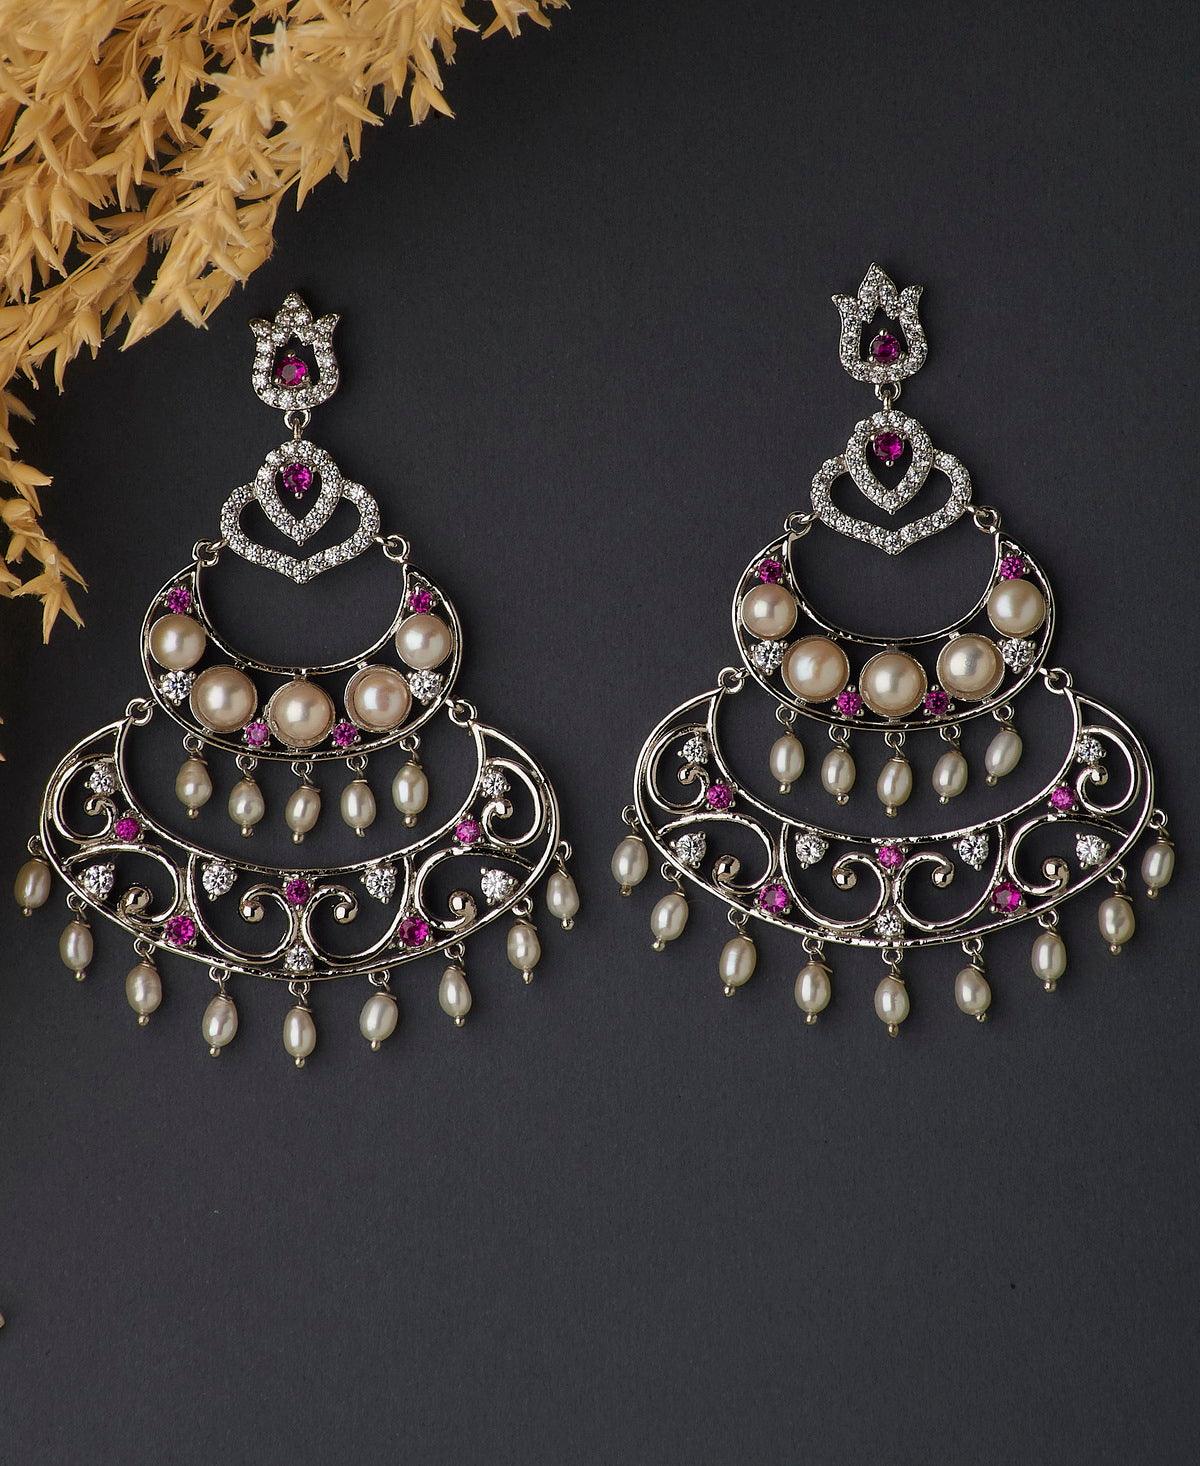 Amazing Old Indian Style Silver Women's Fashion Earrings Combo